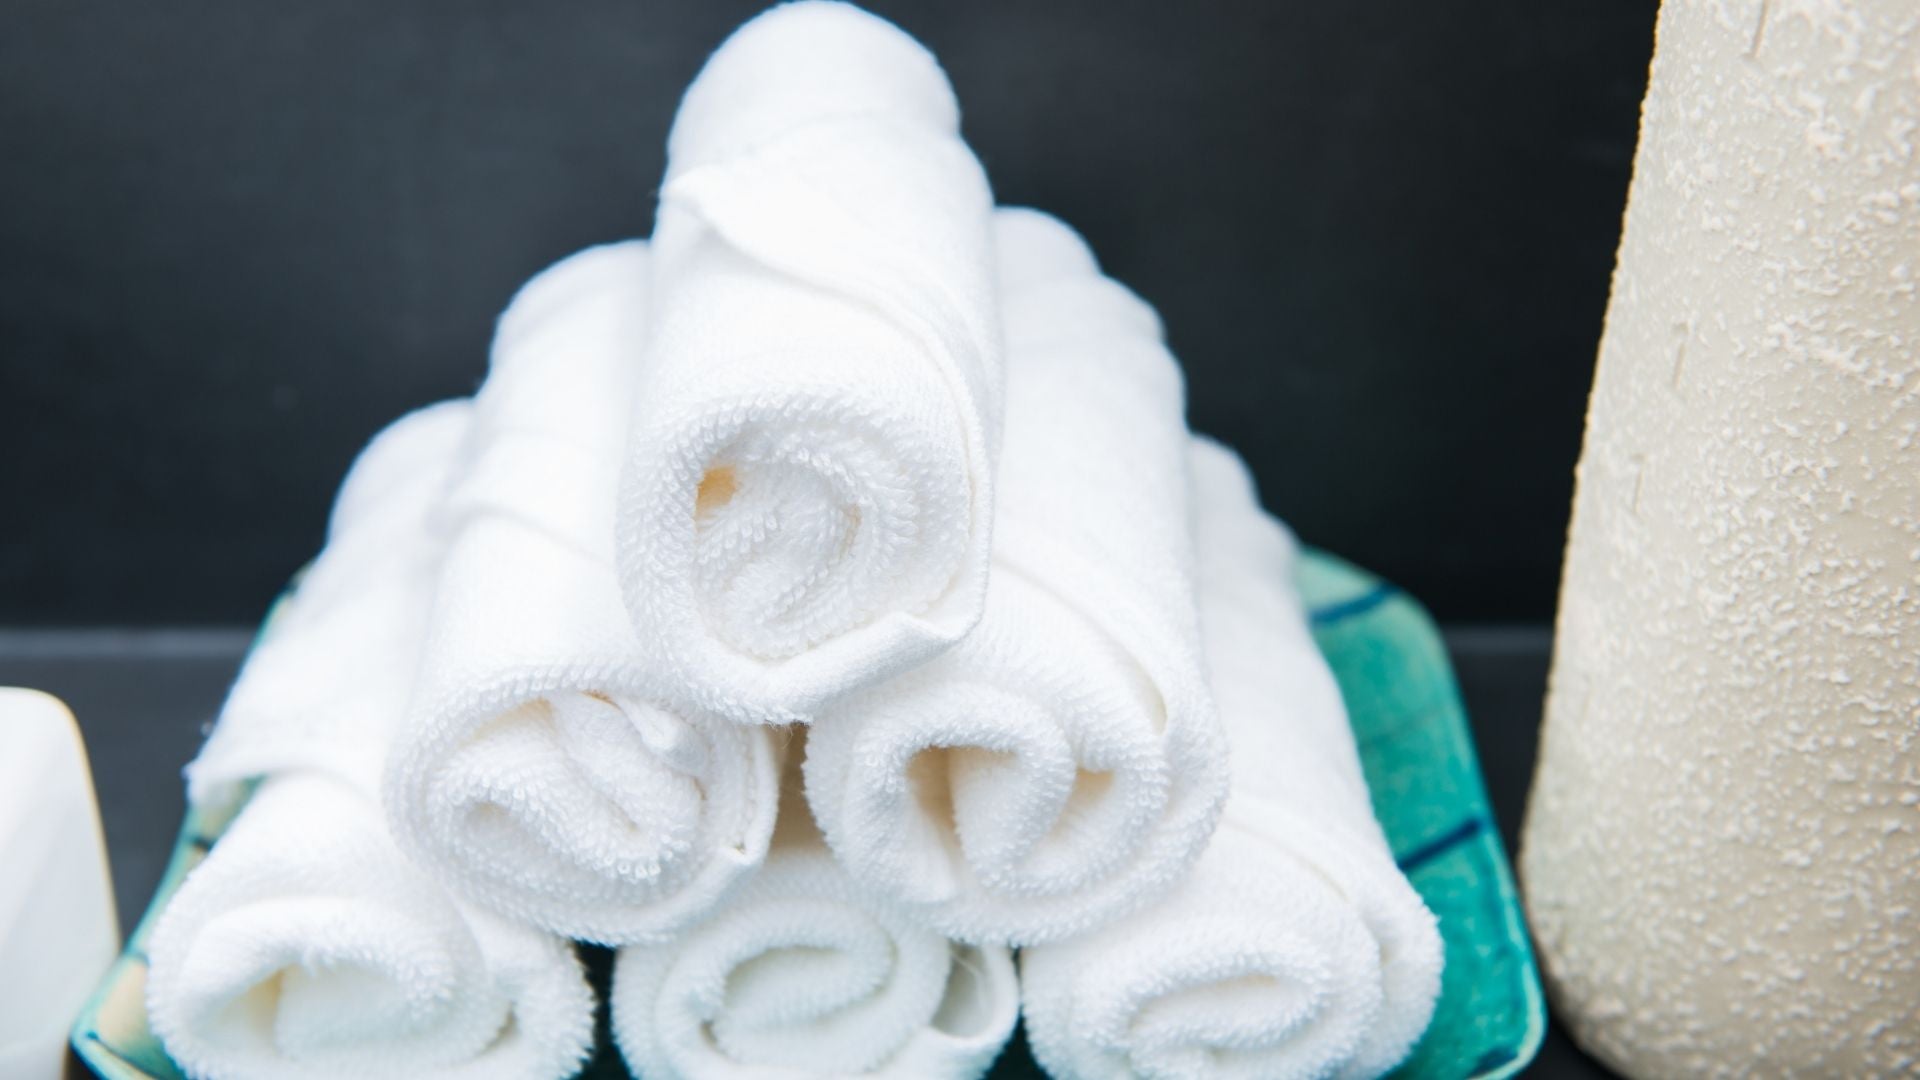 8 Uses Of Bar Mop Towels You Can't Afford To Ignore – Advanced Mixology